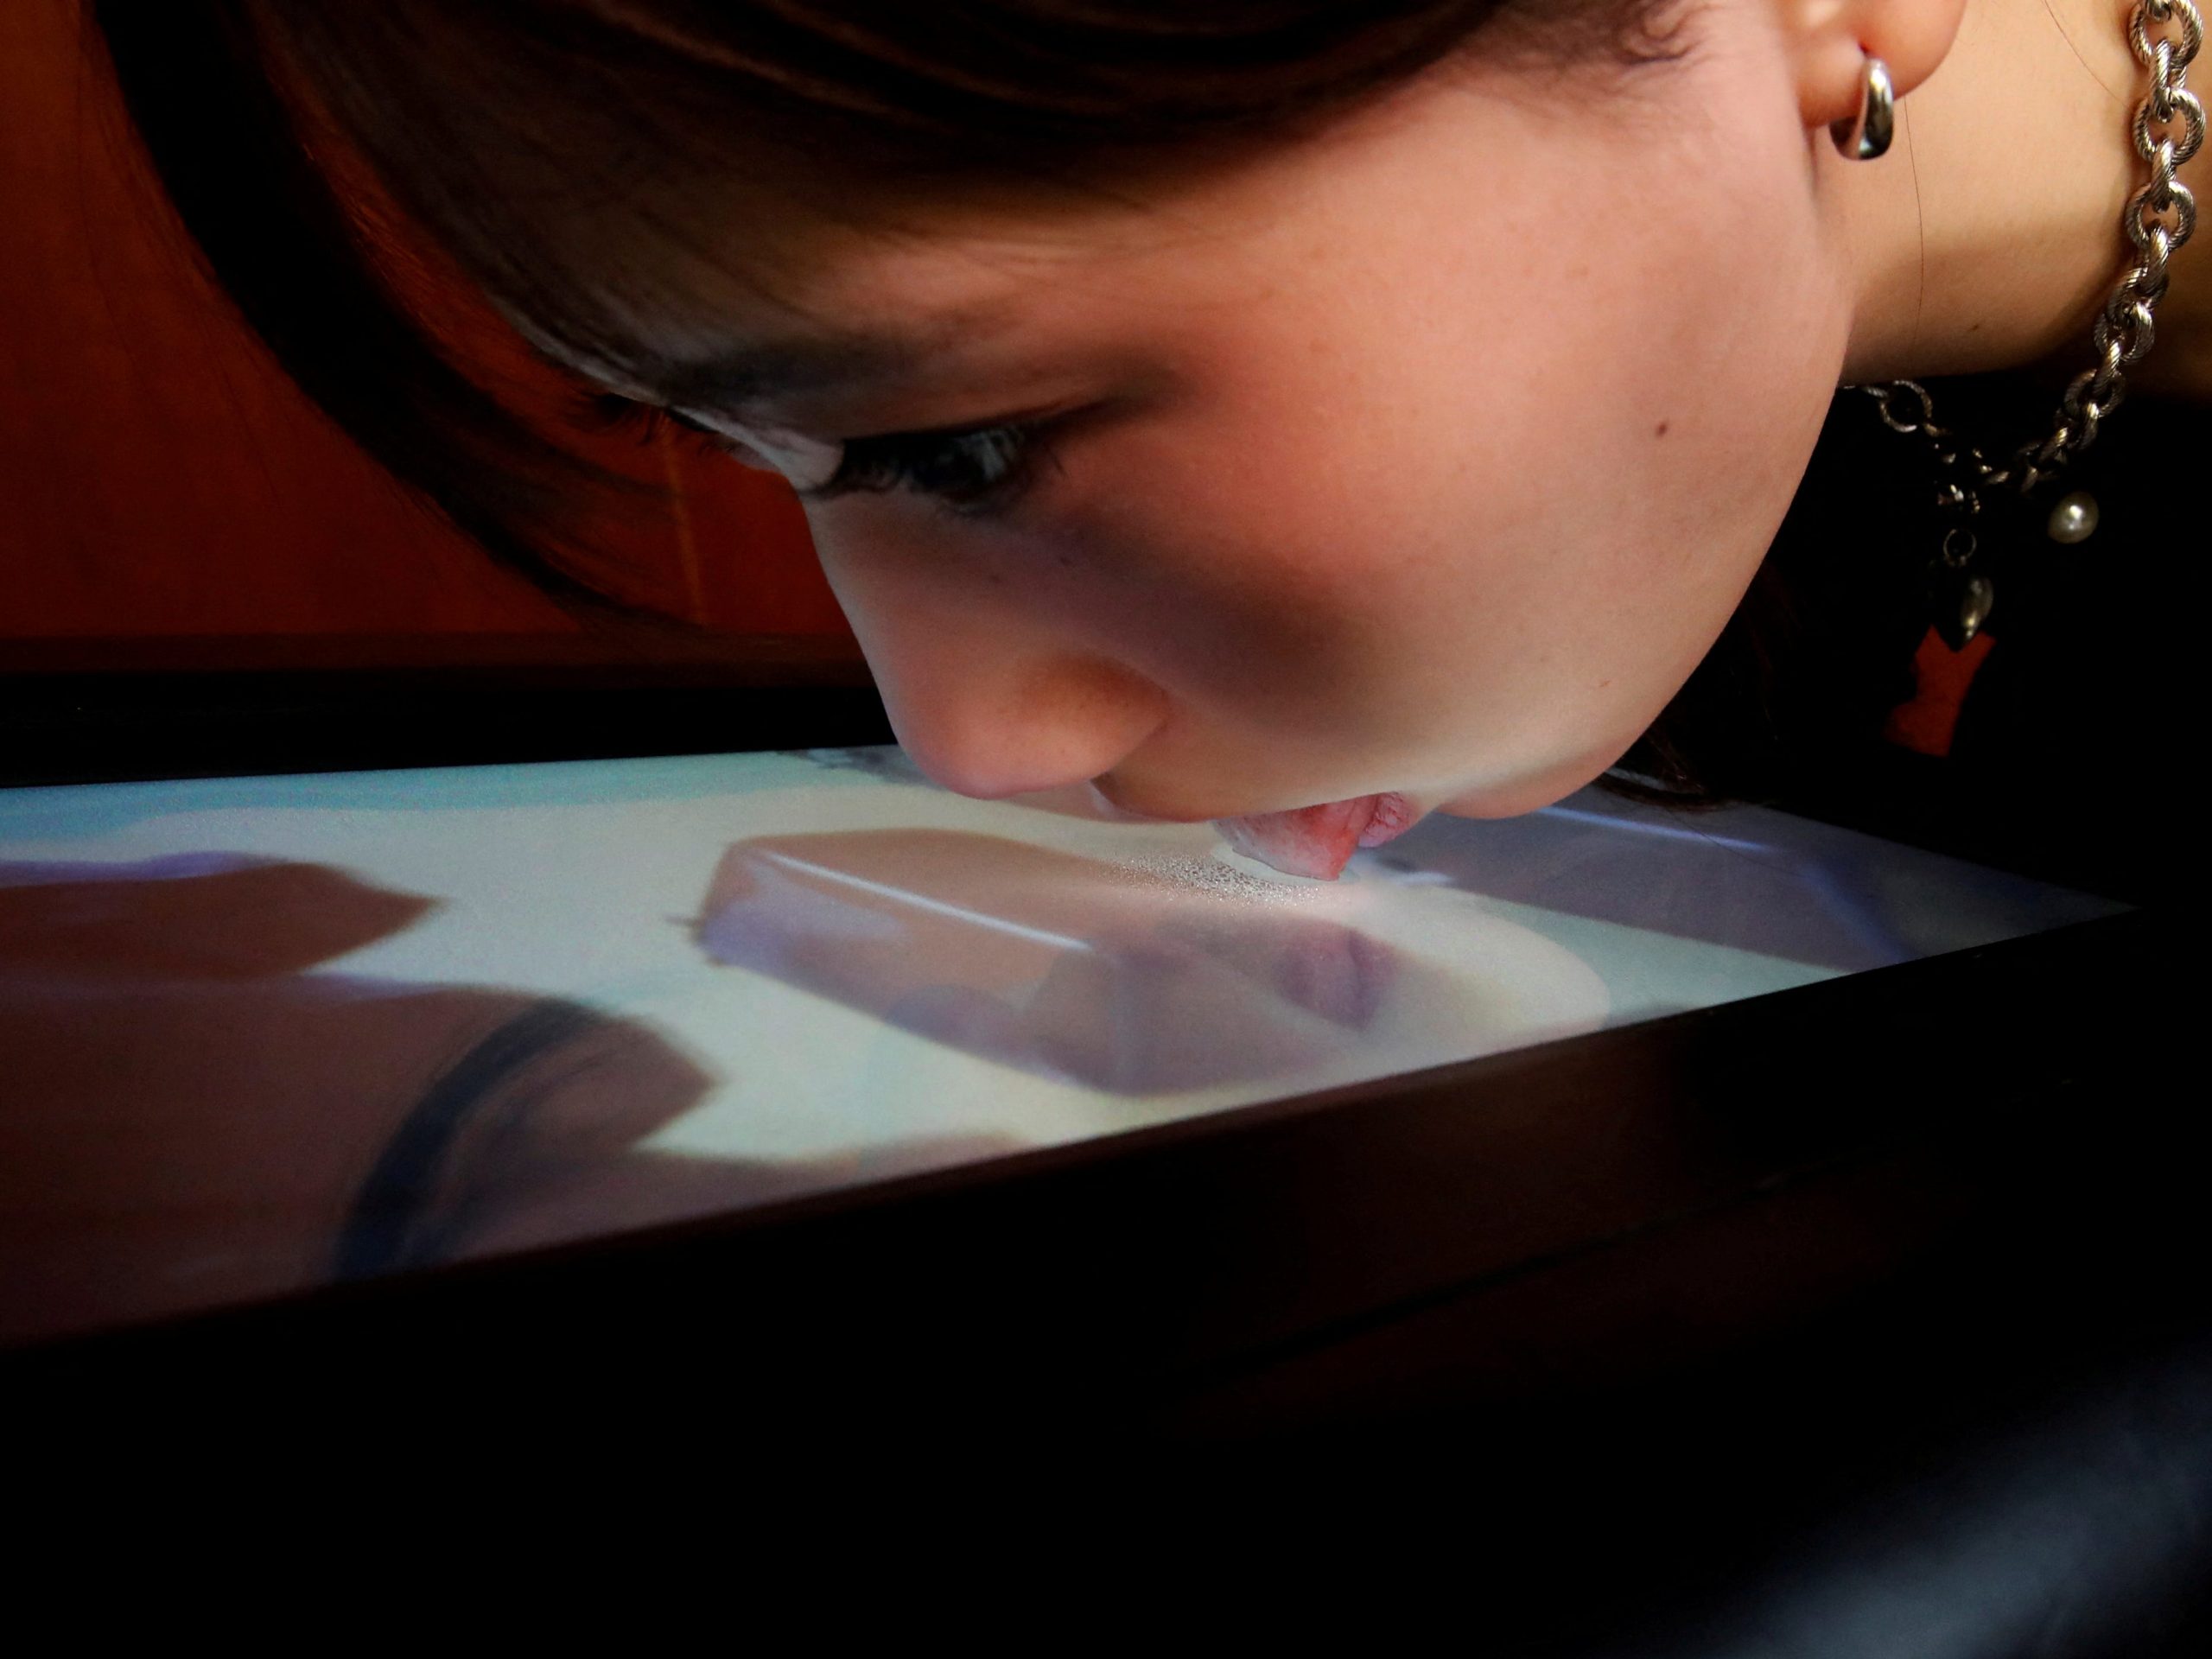 A woman licks the screen of Taste The TV, the prototype of a lickable TV screen.